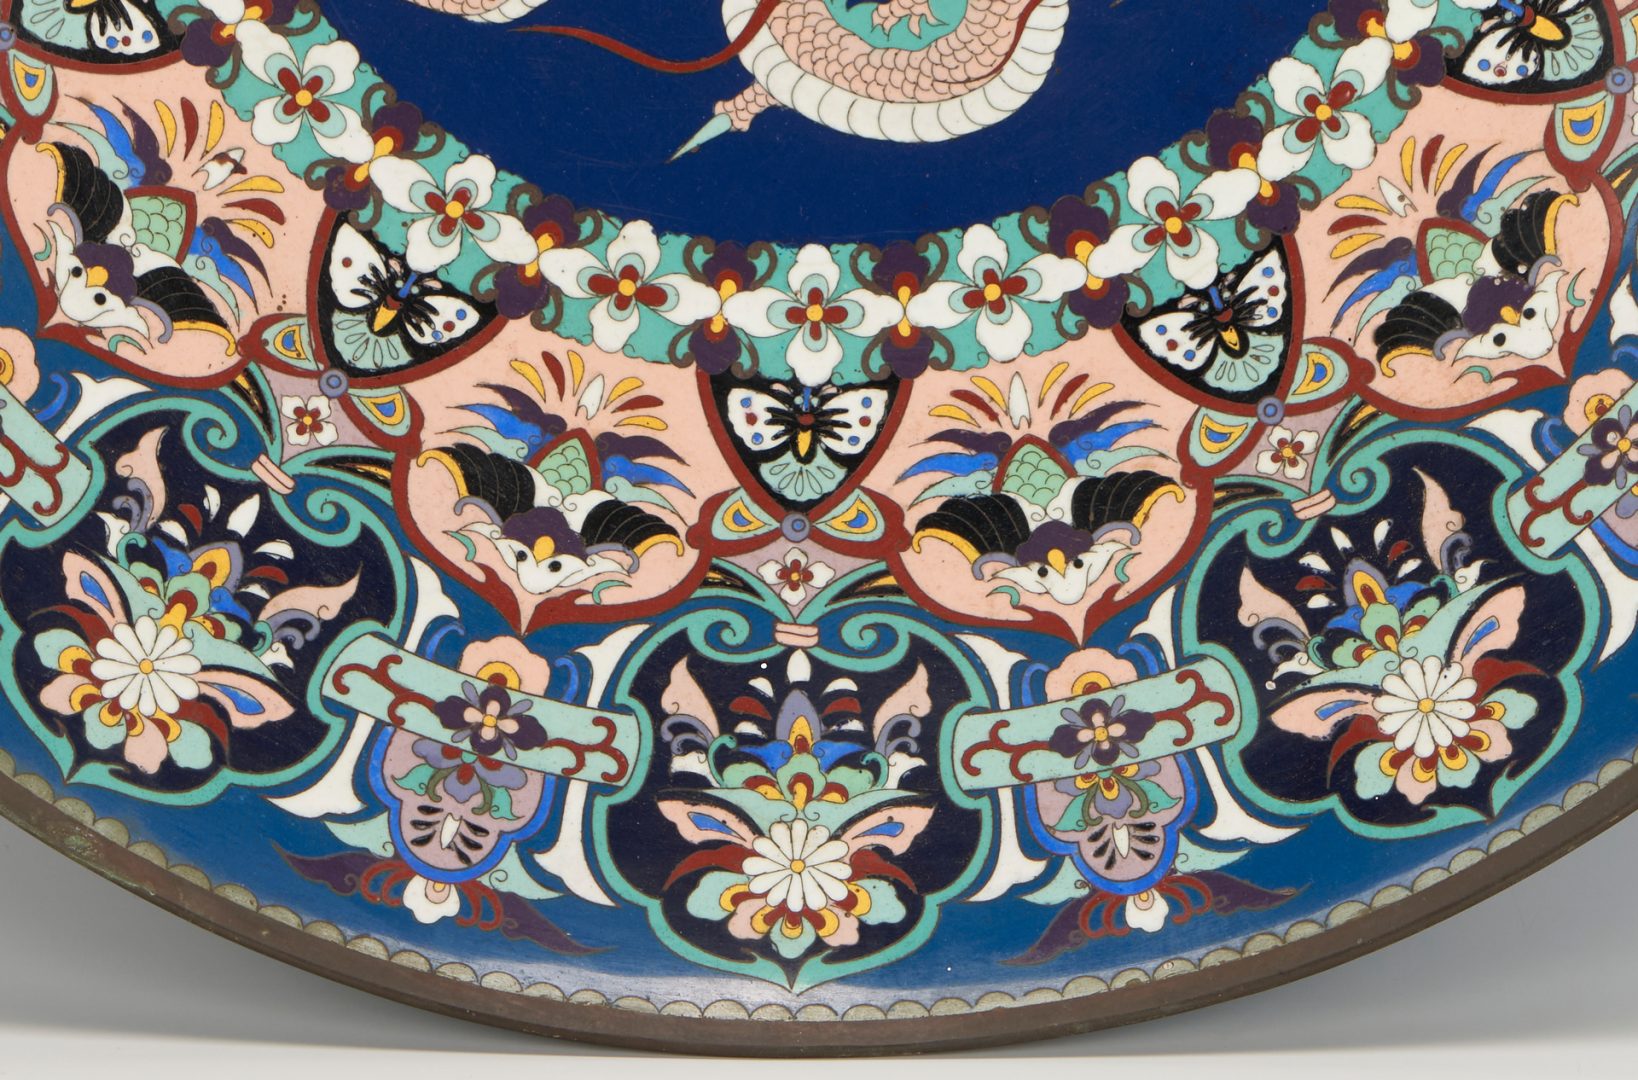 Lot 11: Large Chinese Cloisonne Dragon Charger, 24" diam.